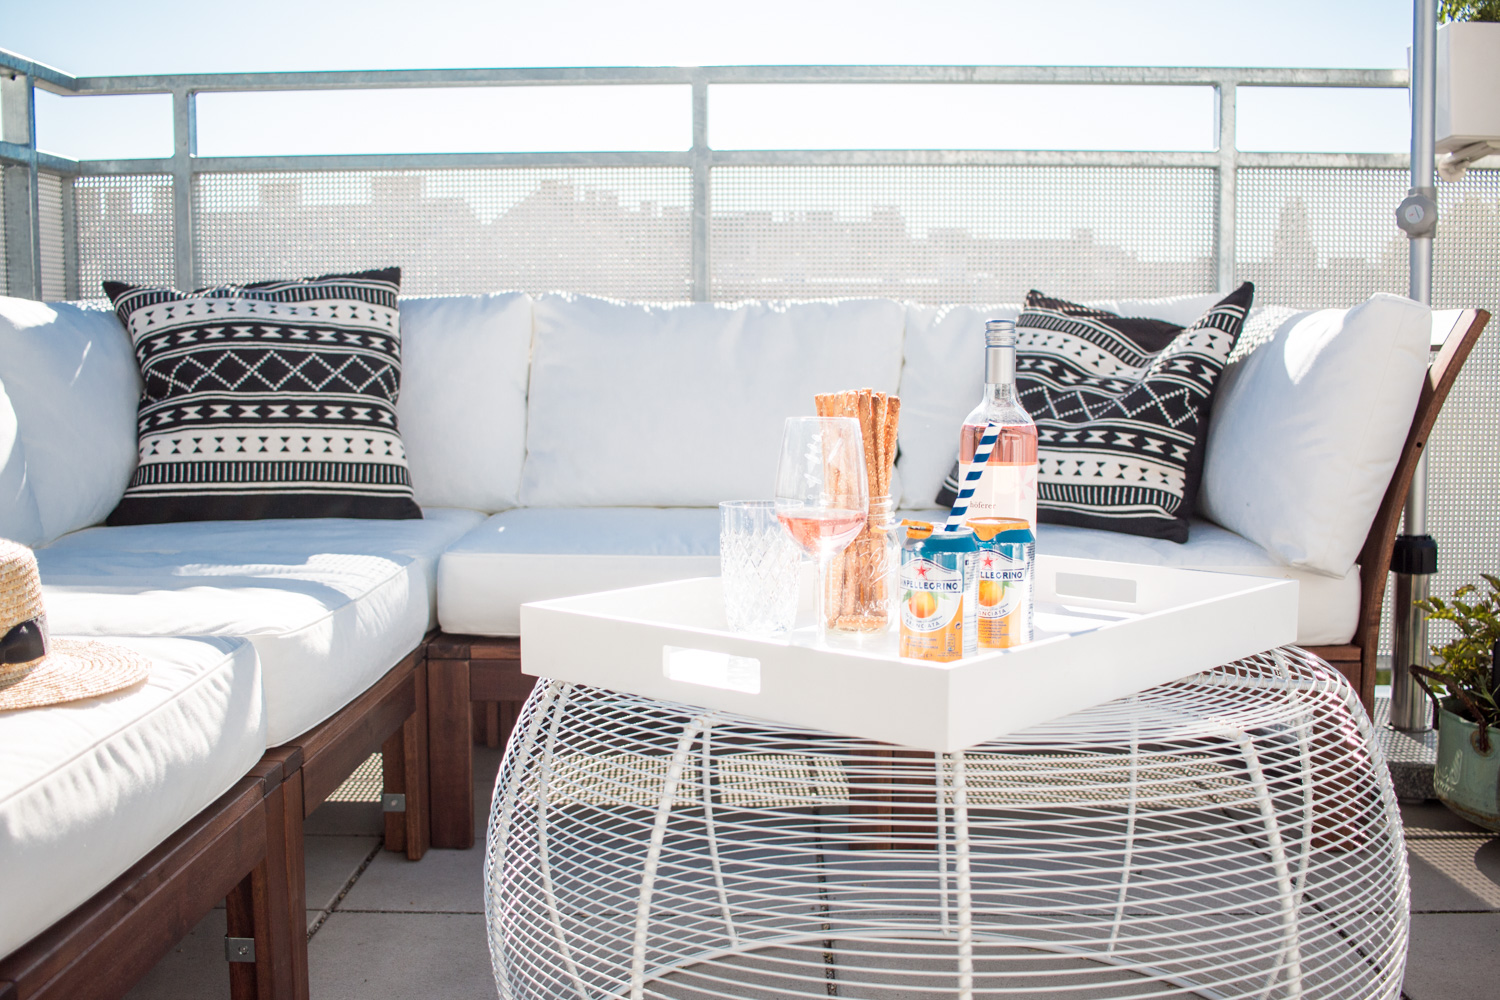 Interior Update: Rooftops - Outdoor Deck Inspiration | Love Daily Dose